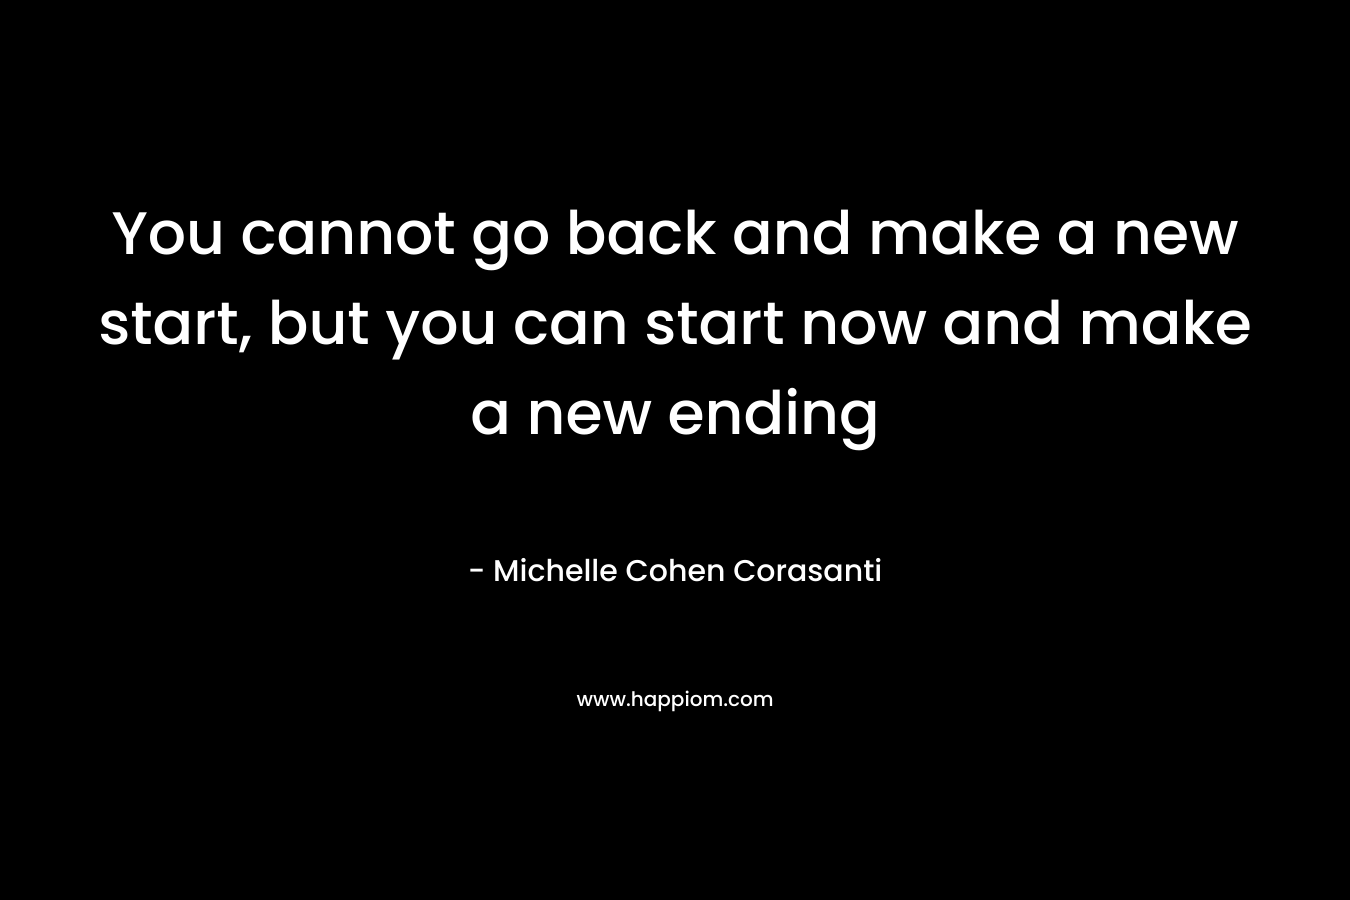 You cannot go back and make a new start, but you can start now and make a new ending